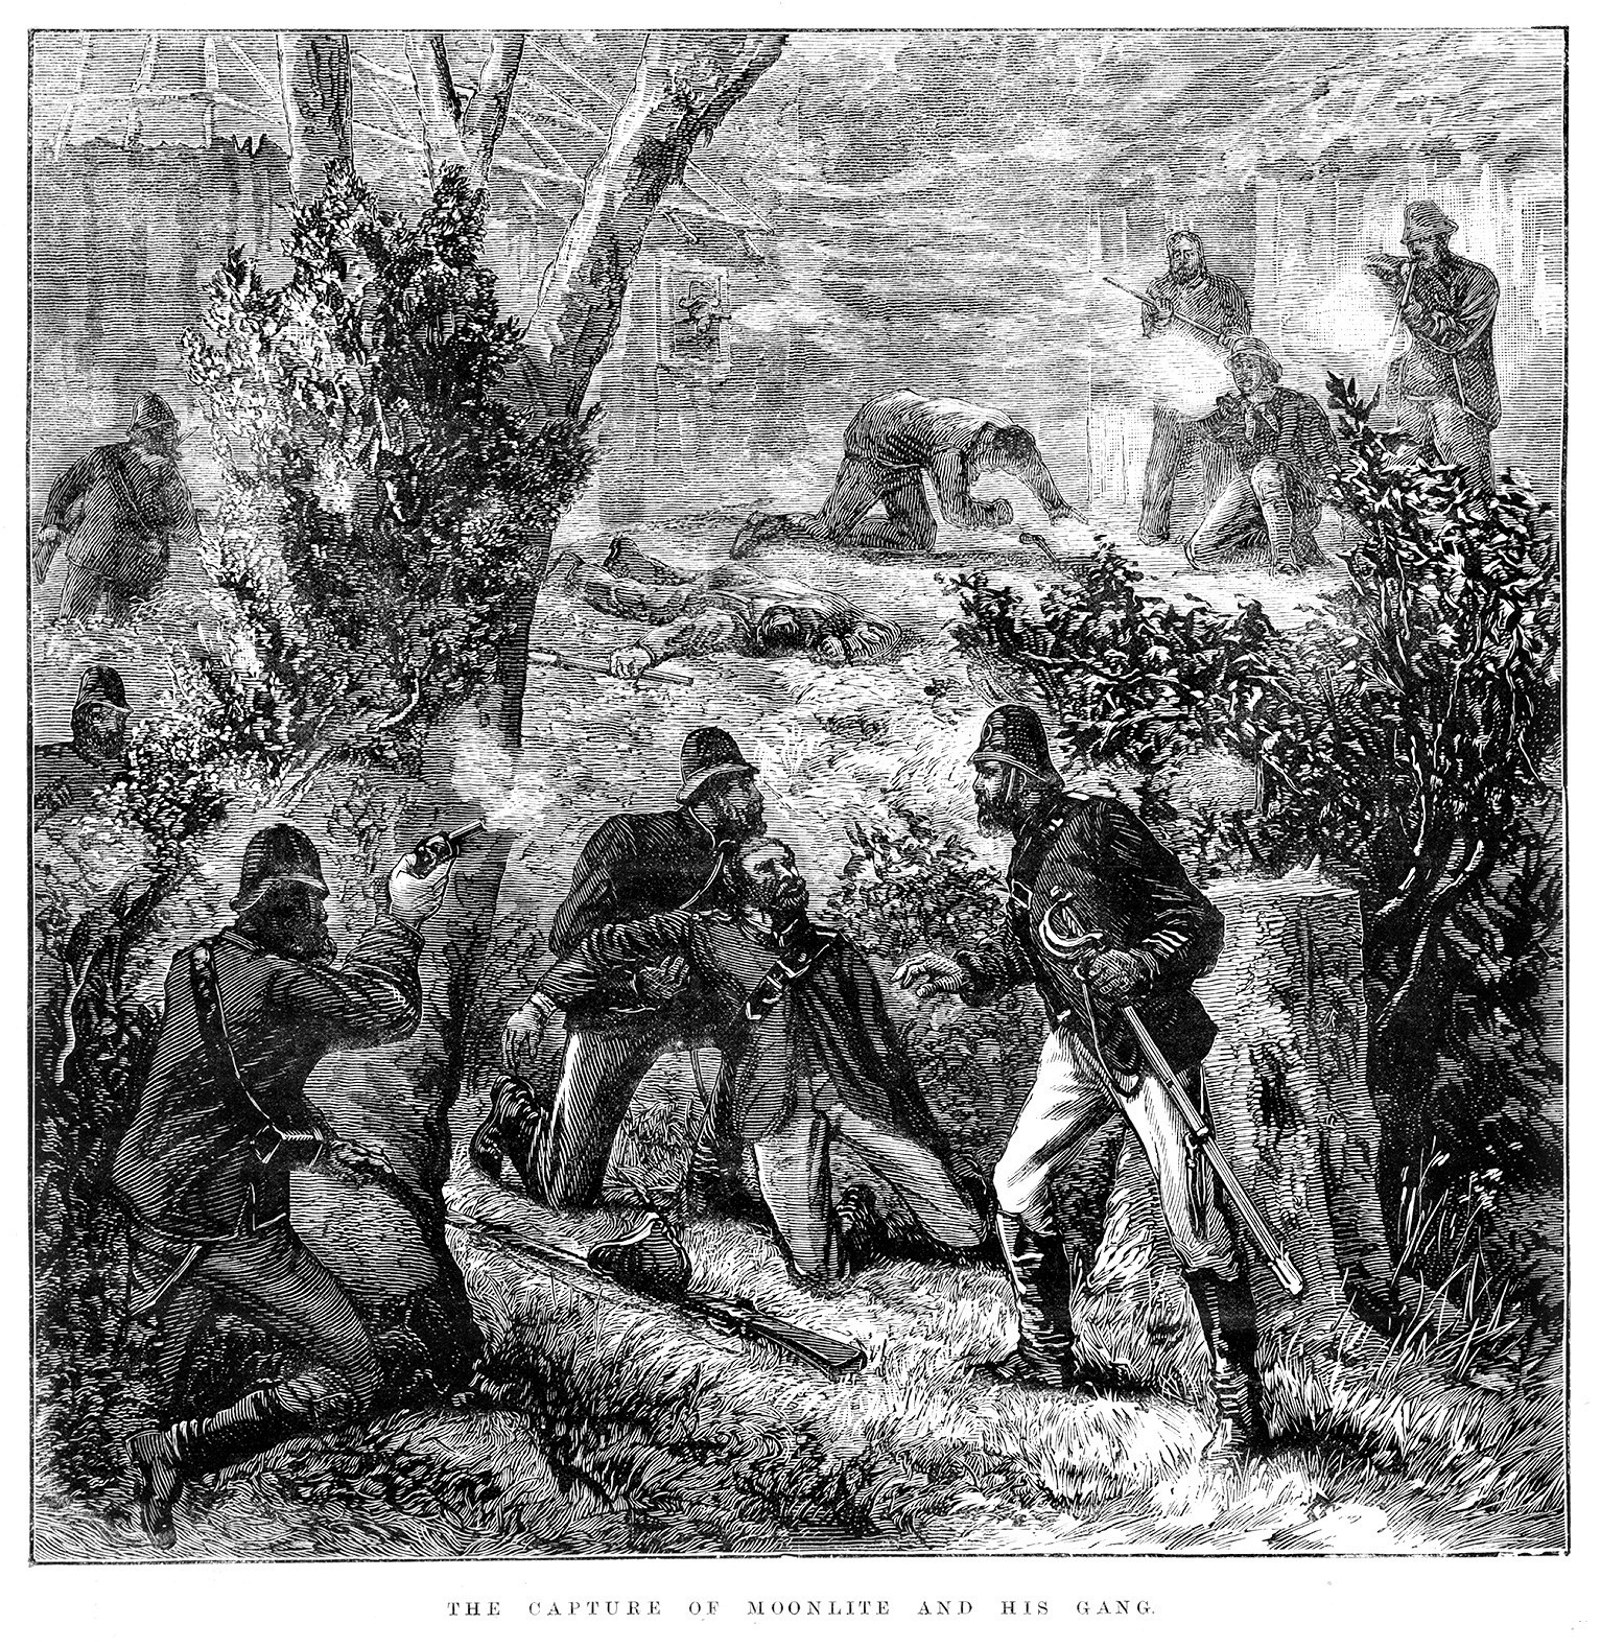 Engraved bush scene with three troopers in helmets with weapons, one holding wounded man, with other figures in background.